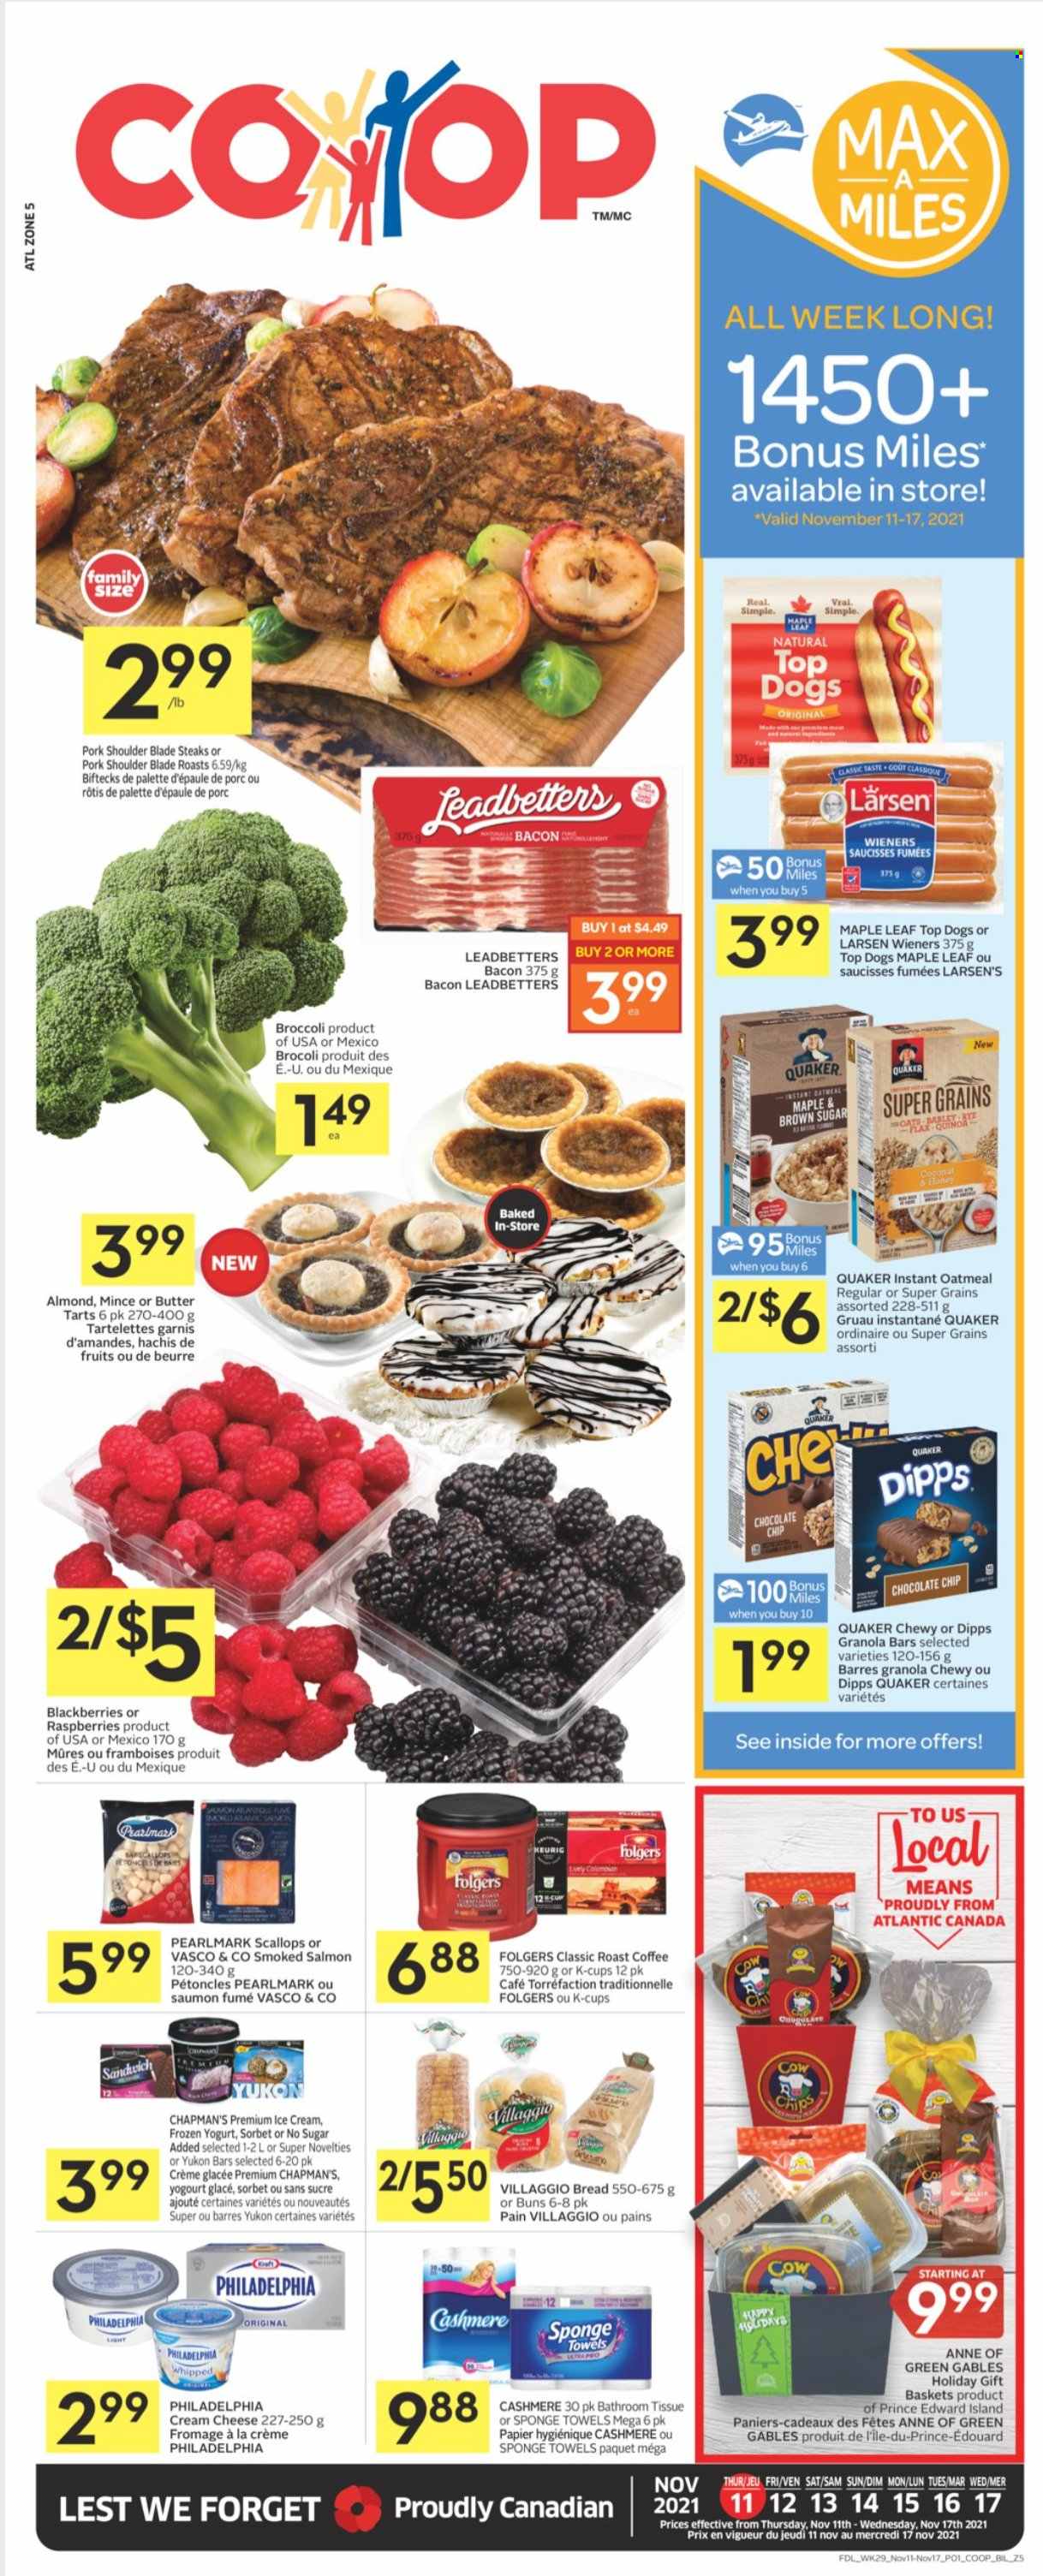 thumbnail - Co-op Flyer - November 11, 2021 - November 17, 2021 - Sales products - bread, buns, broccoli, blackberries, salmon, scallops, smoked salmon, sandwich, Quaker, bacon, cream cheese, cheese, yoghurt, butter, ice cream, chocolate chips, oatmeal, oats, granola bar, coffee, Folgers, coffee capsules, K-Cups, Keurig, pork meat, pork shoulder, Philadelphia, steak. Page 1.